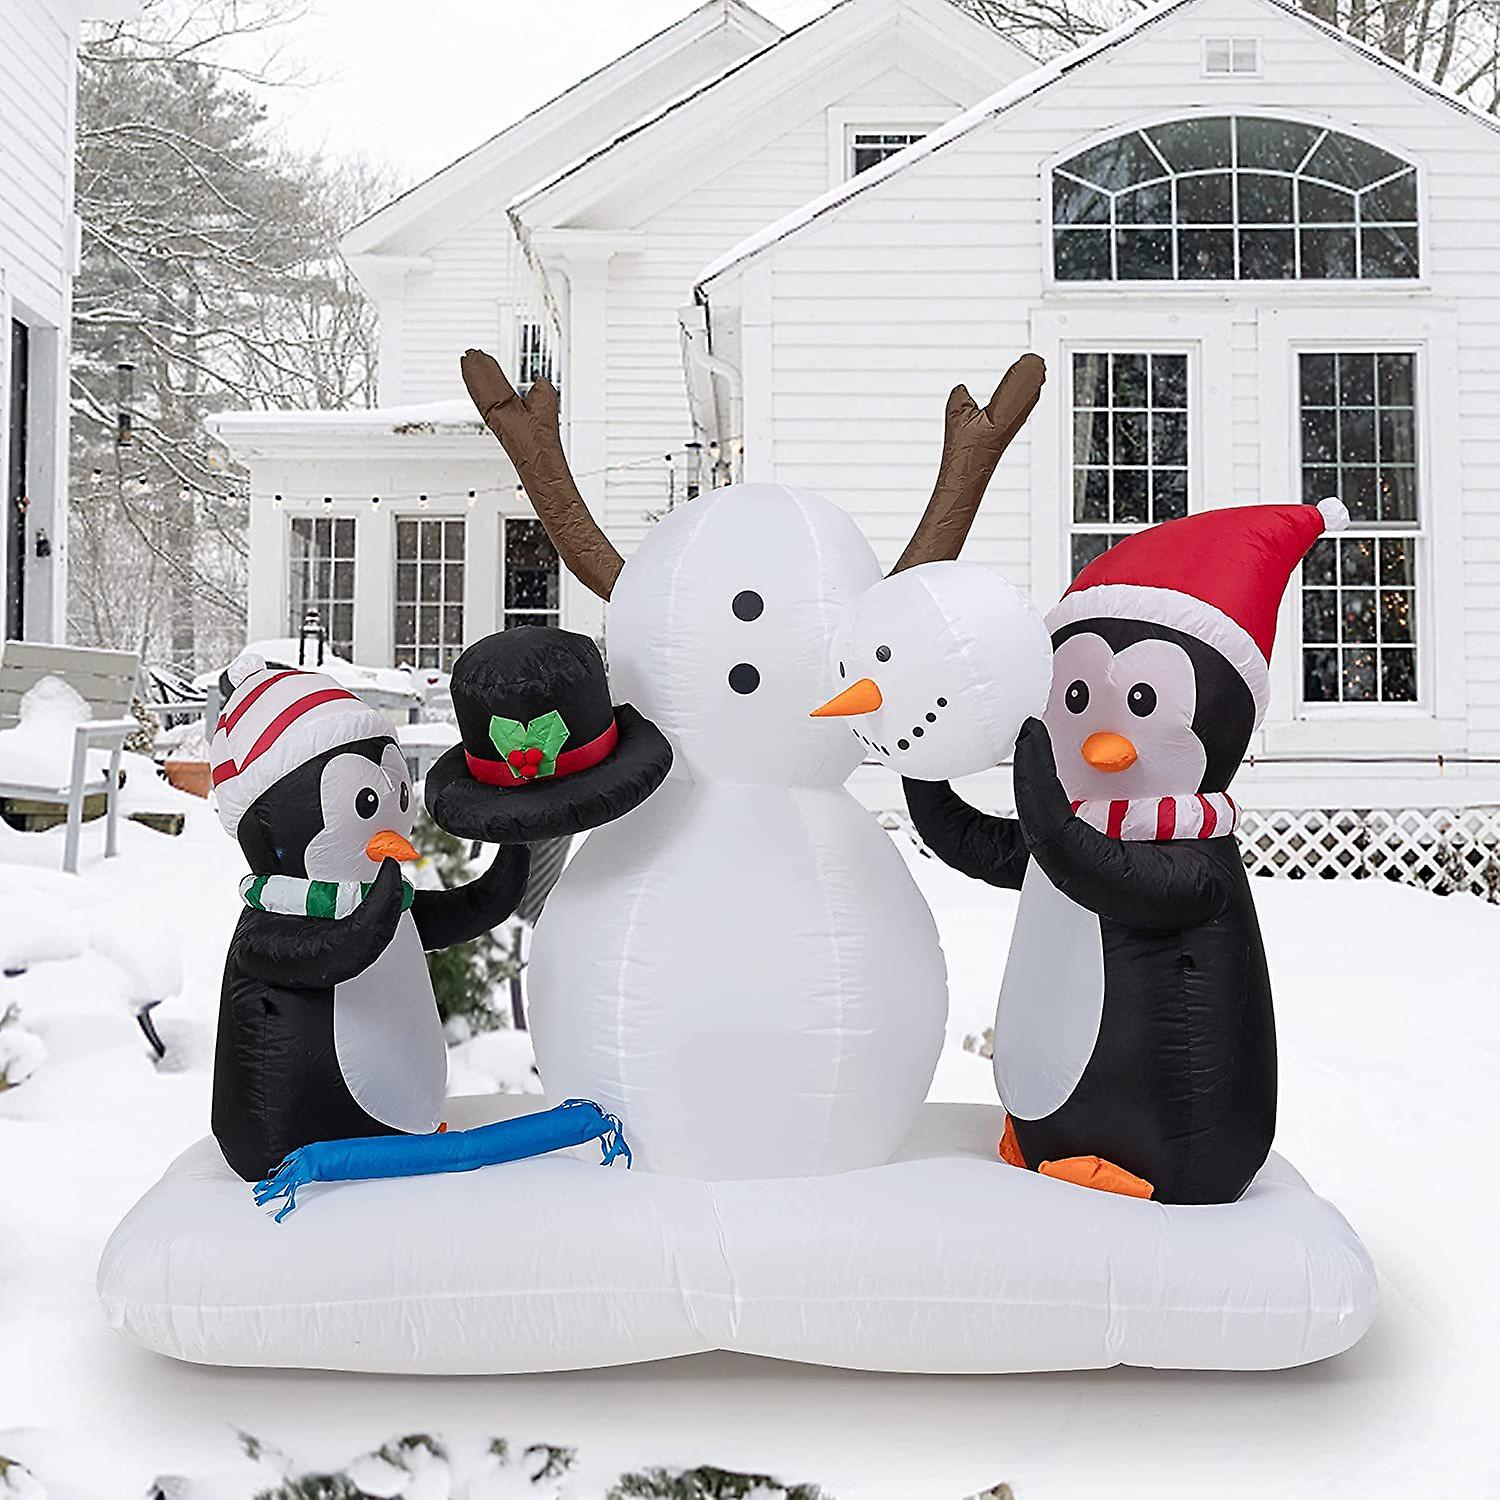 Kurala Christmas Inflatable Snowman And Penguins Christmas Decoration， 7 Ft Long 5.4 Ft High Christmas Blow Up Yard Decoration， Built-in Led Lights